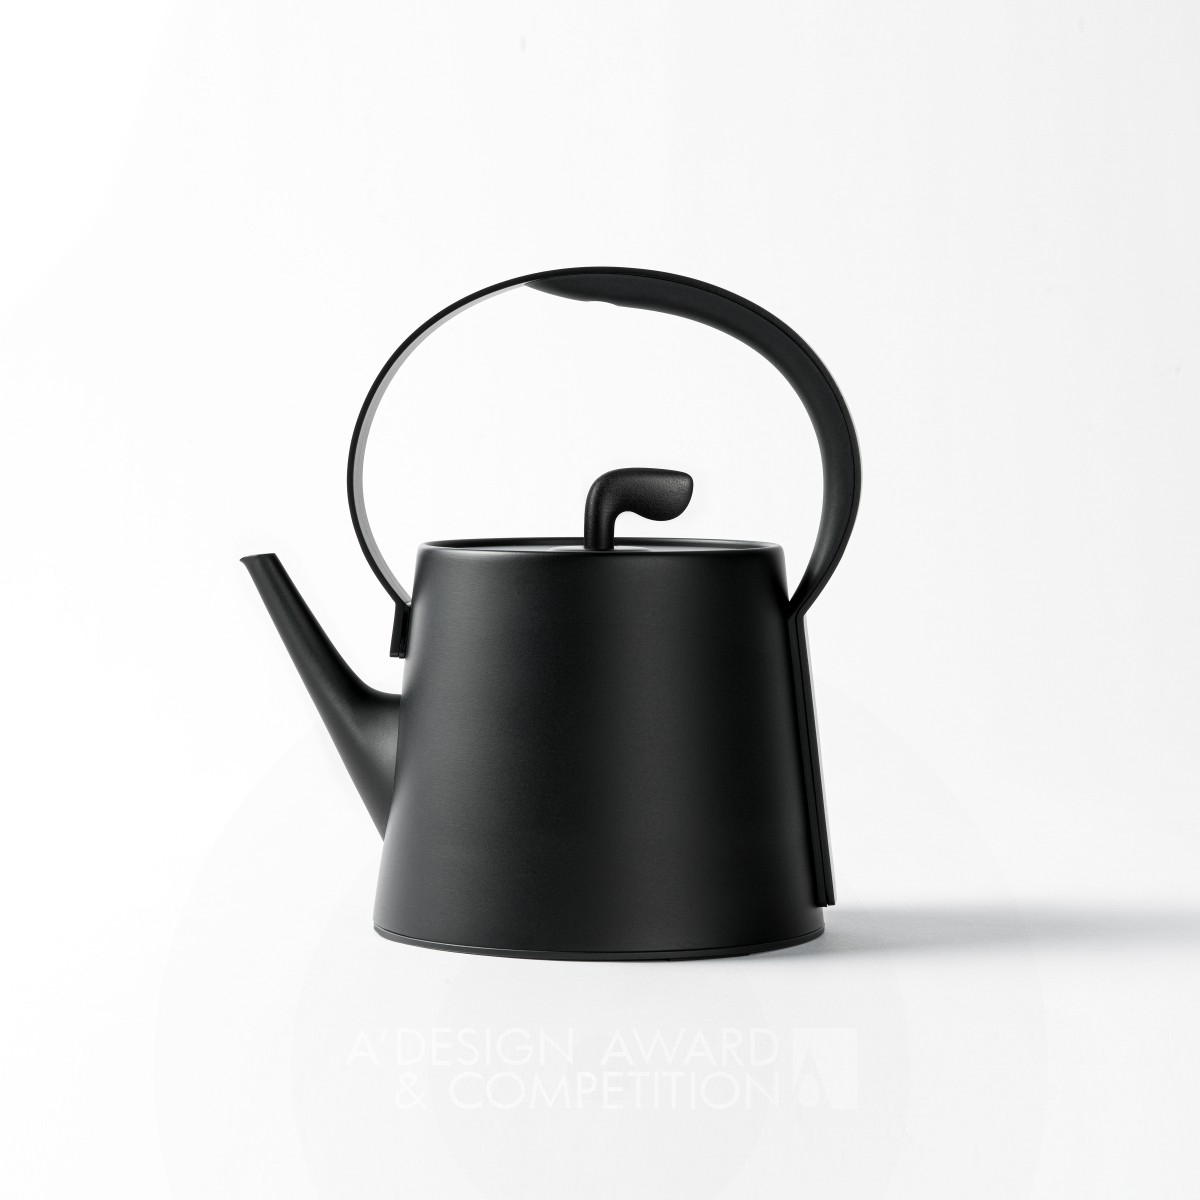 Edenus Art Co.,Ltd wins Silver at the prestigious A' Home Appliances Design Award with Forget Intelligent Kettle.